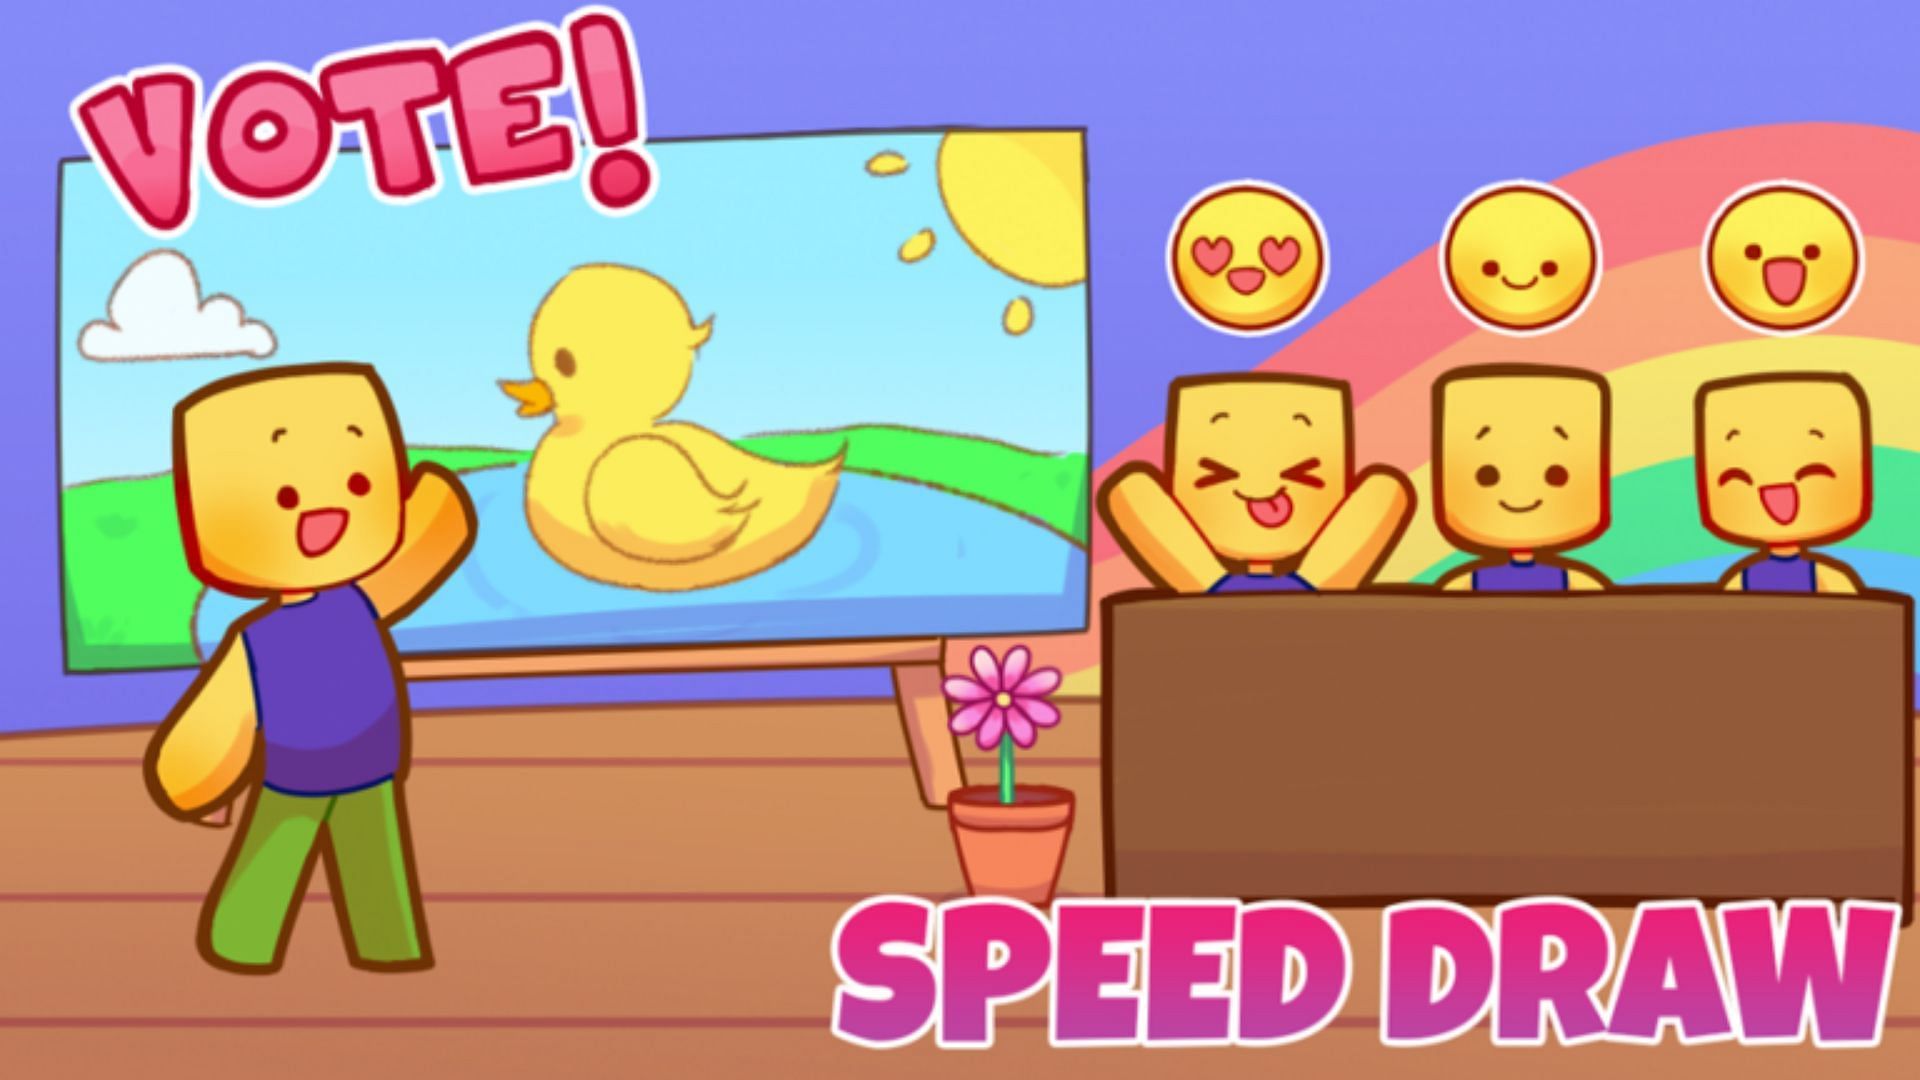 About Speed Draw (Image via Roblox)